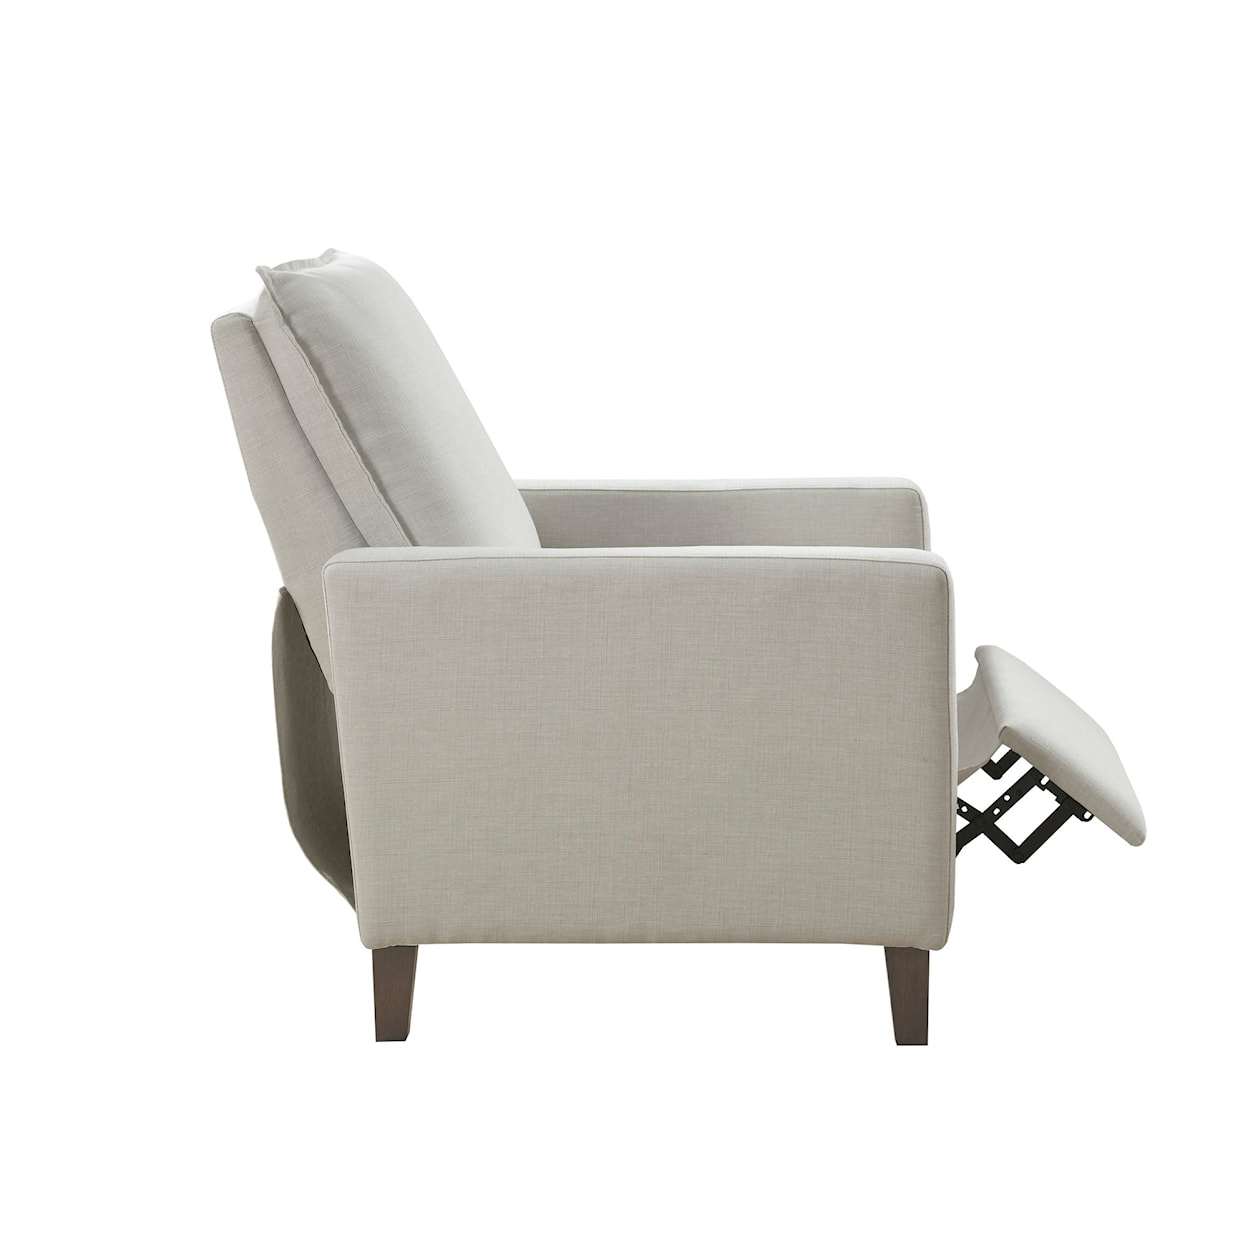 JLA Home Home Accents Track Arm Recliner